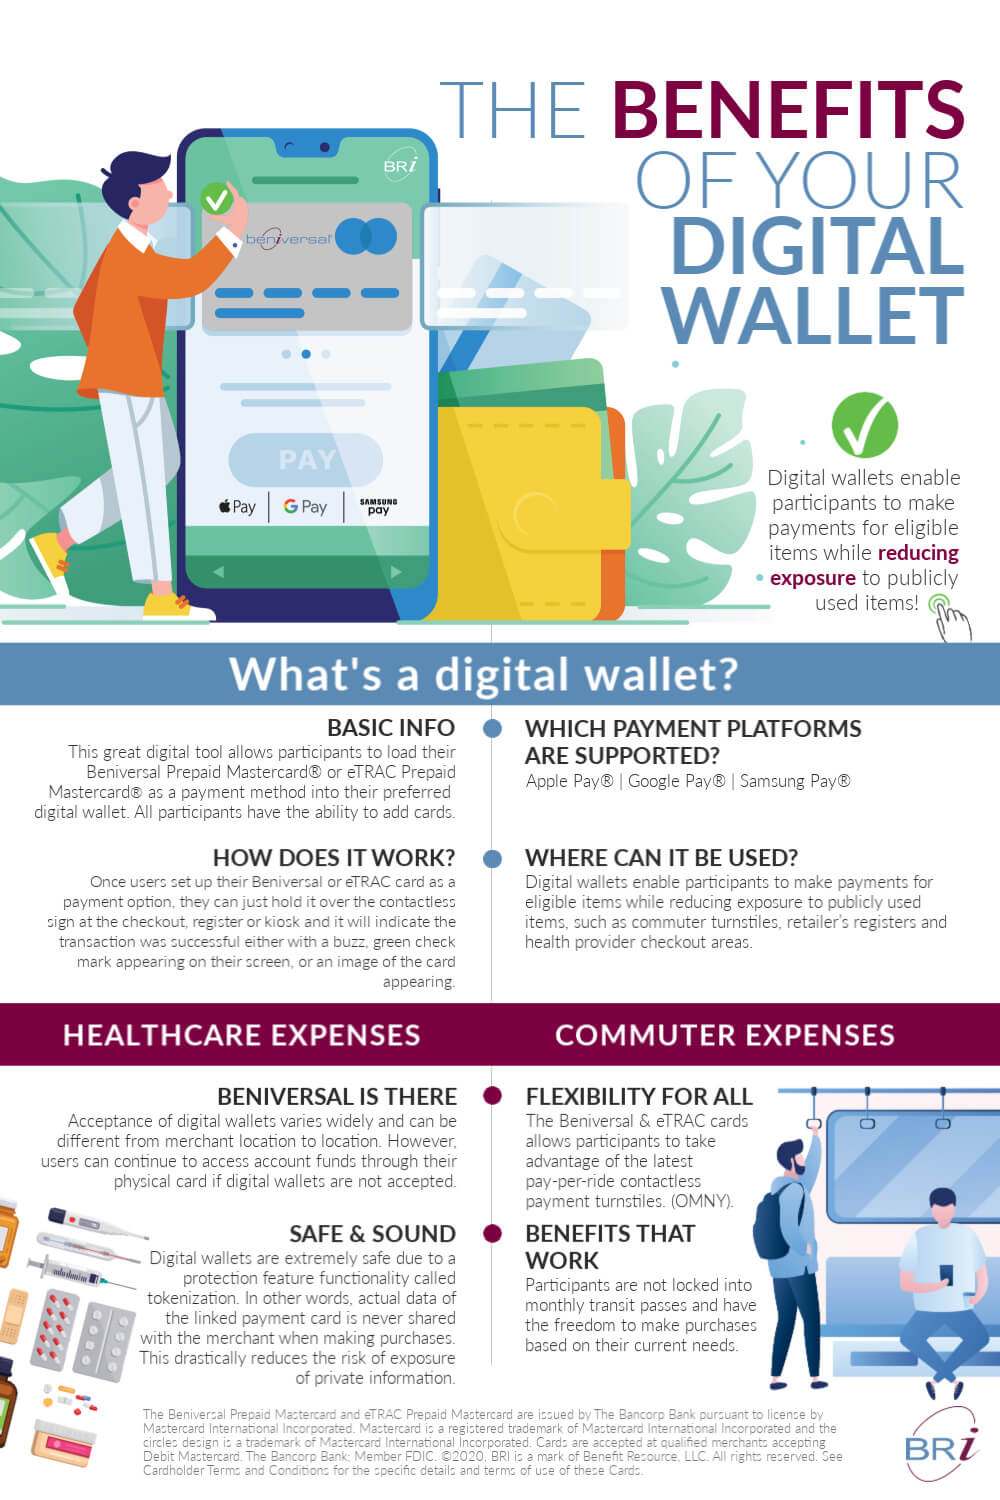 The Benefits of Your Digital Wallet infographic